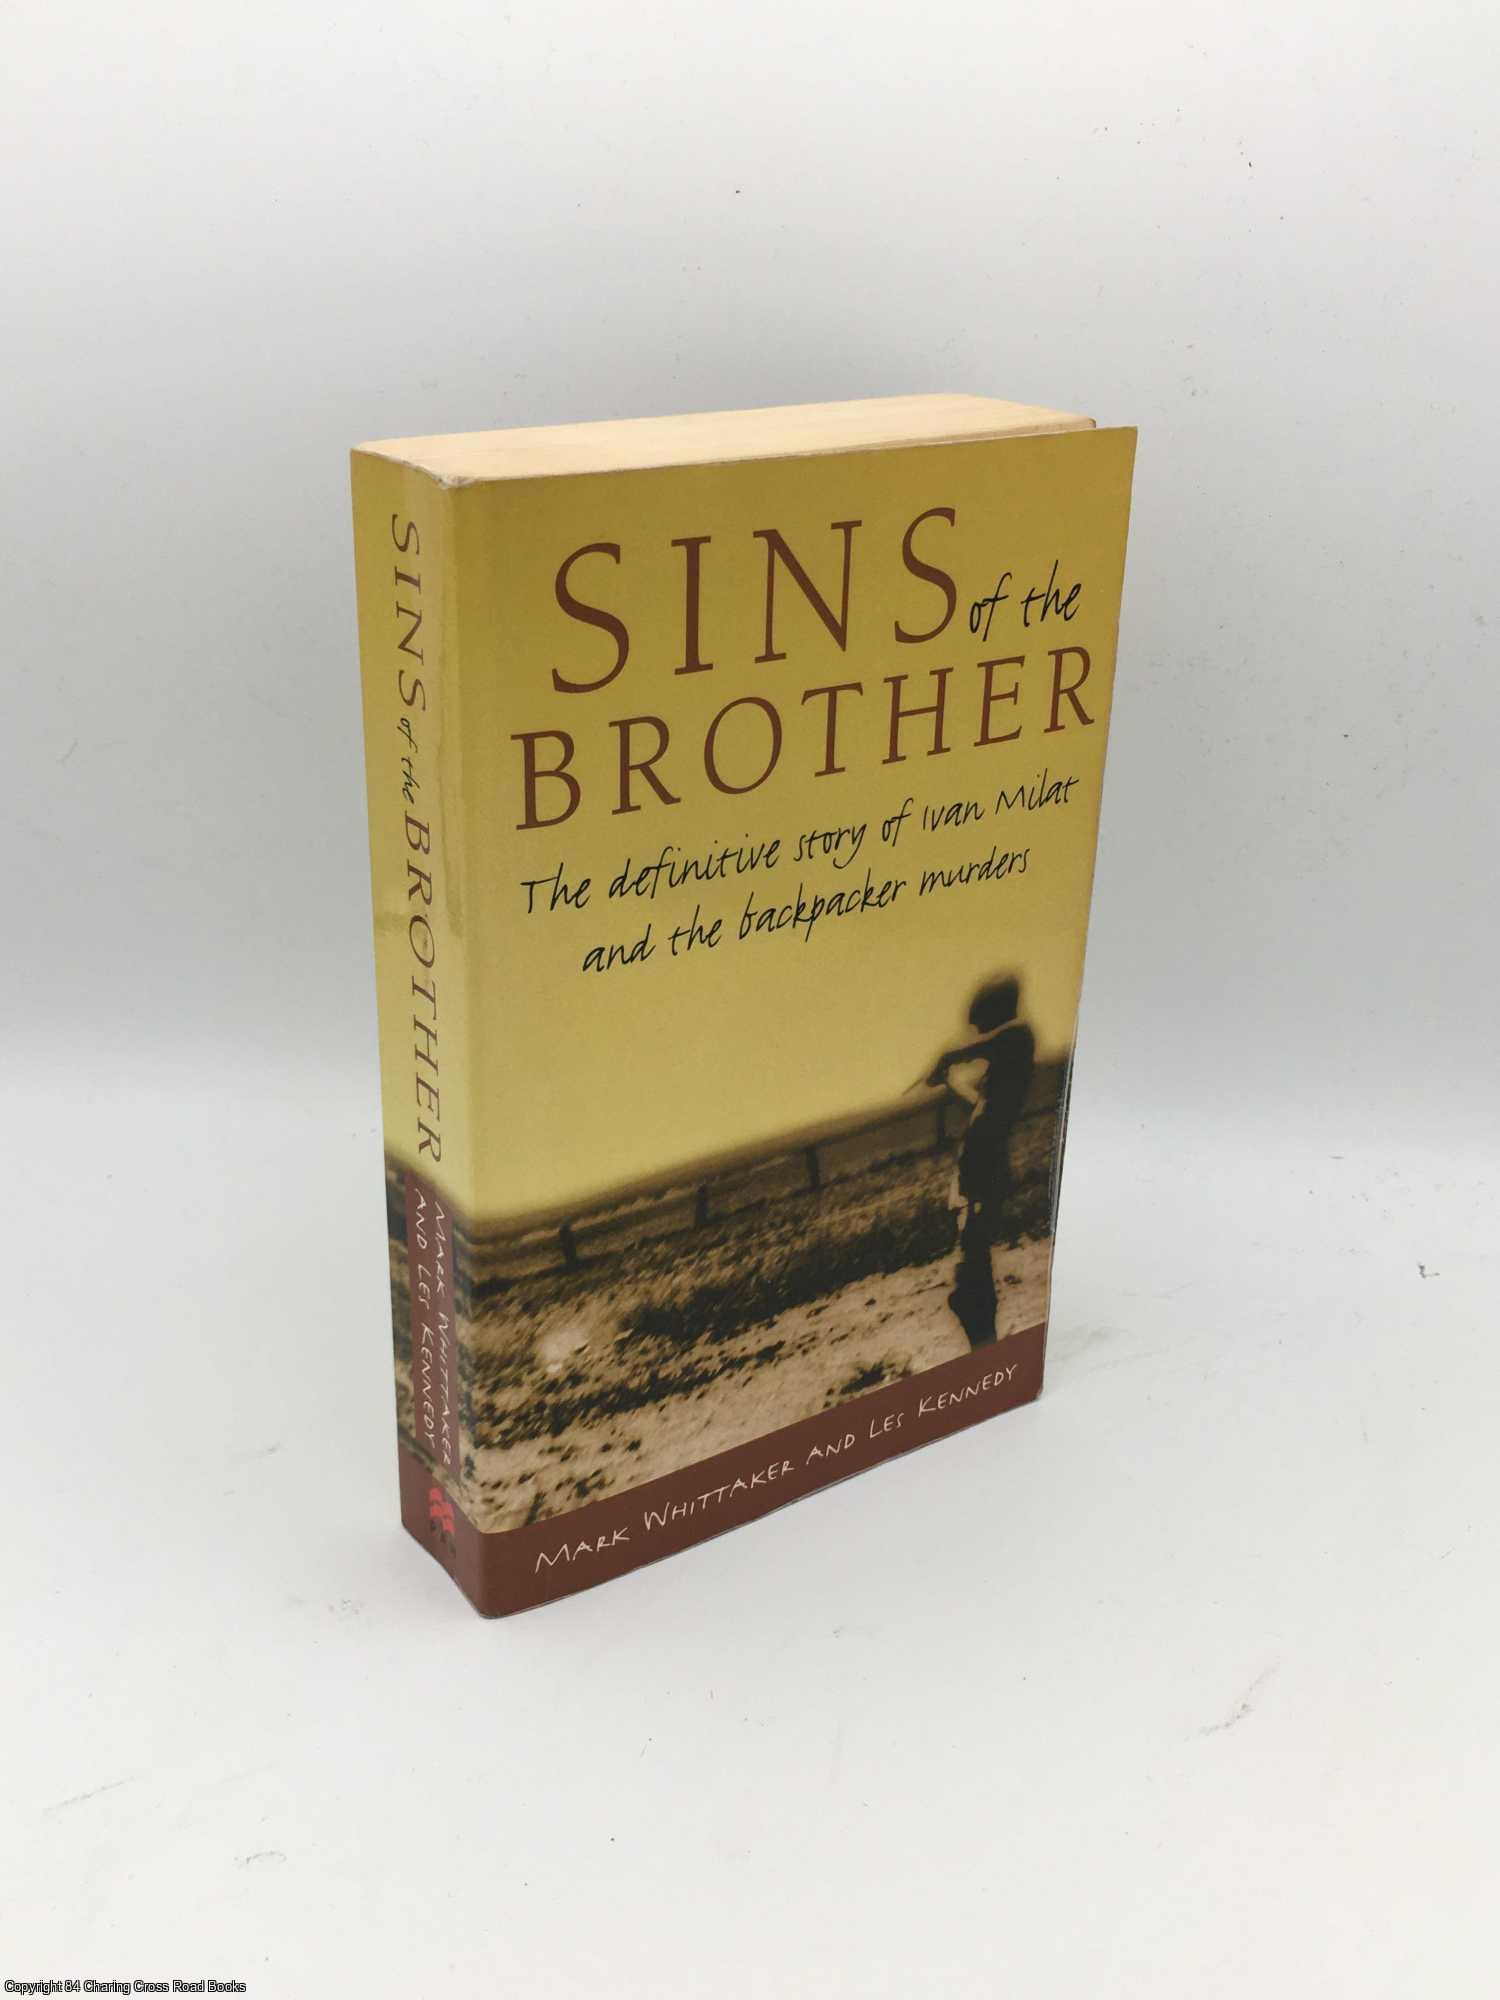 Whittaker, Mark - Sins of the Brother: The Definitive Story of Ivan Milat and the Backpacker Murders